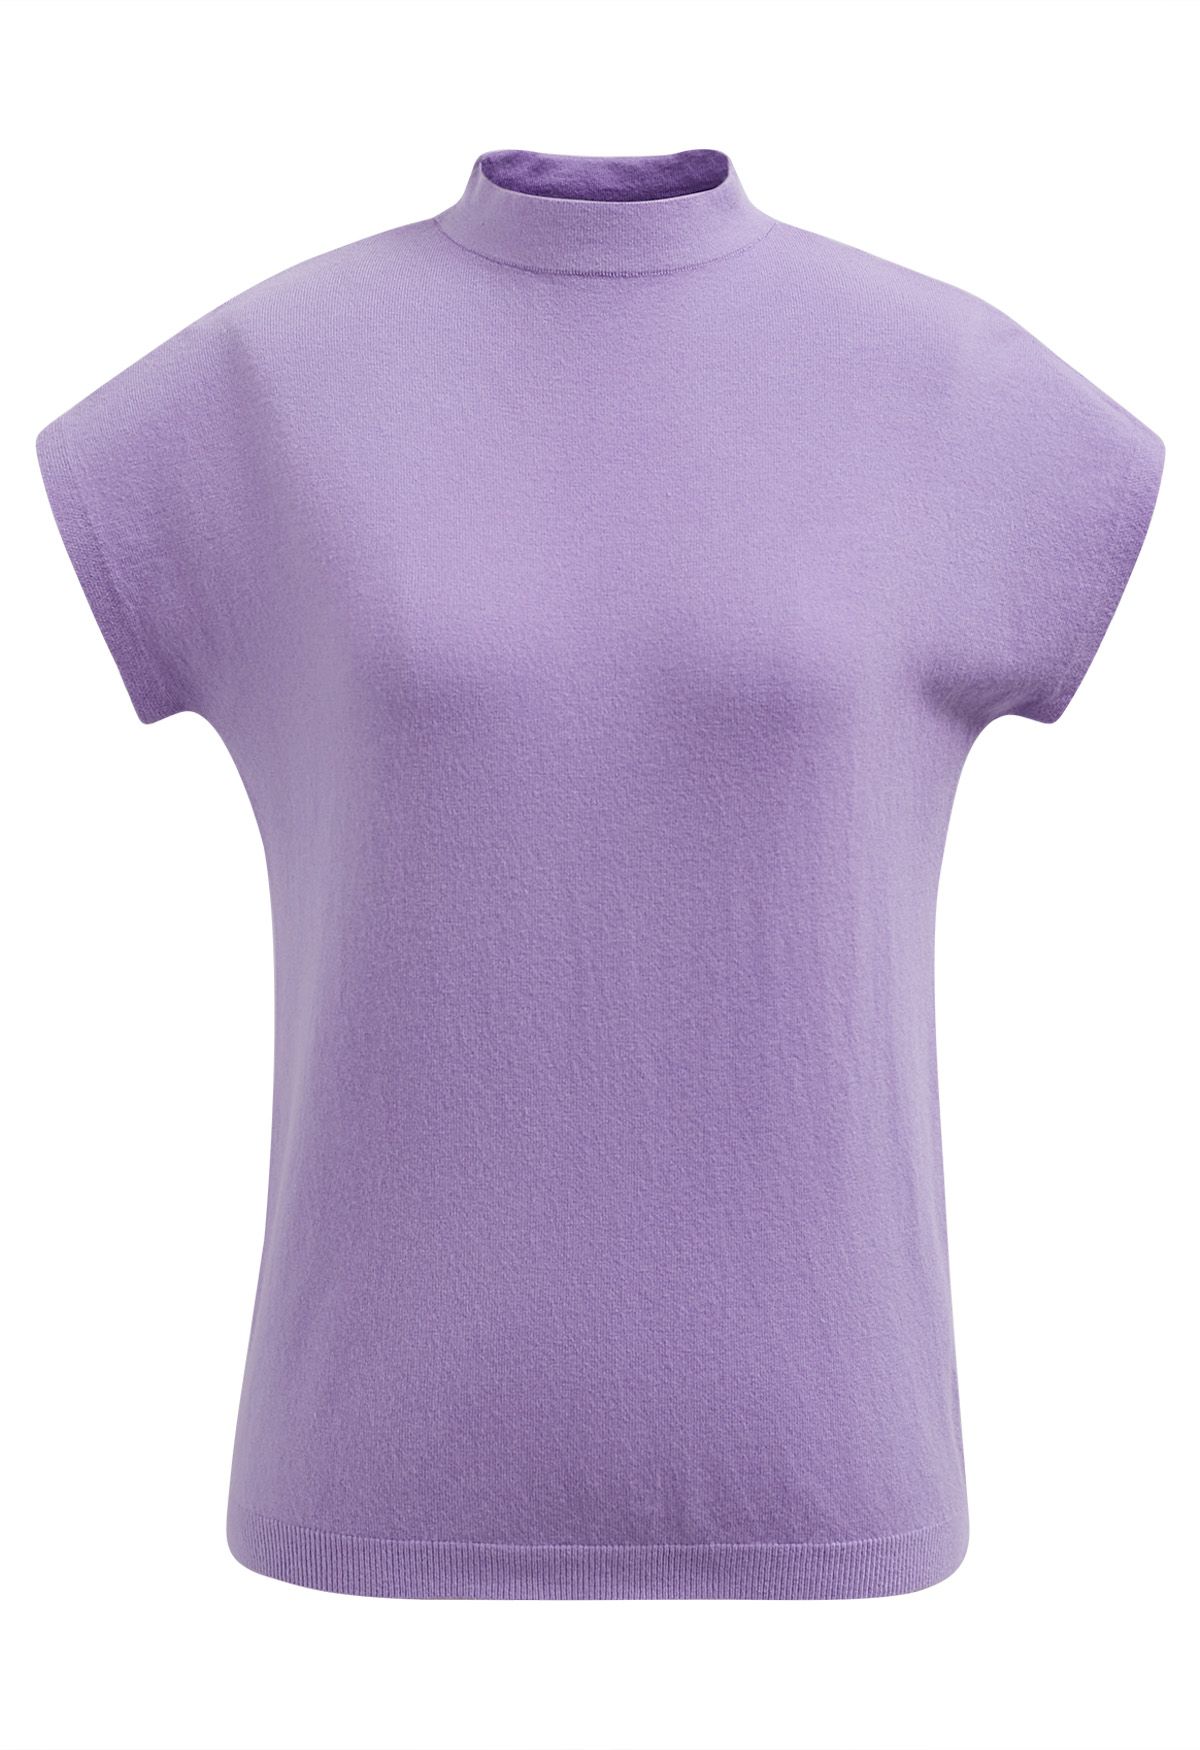 Solid Color Cap Sleeves Knit Top in Lilac